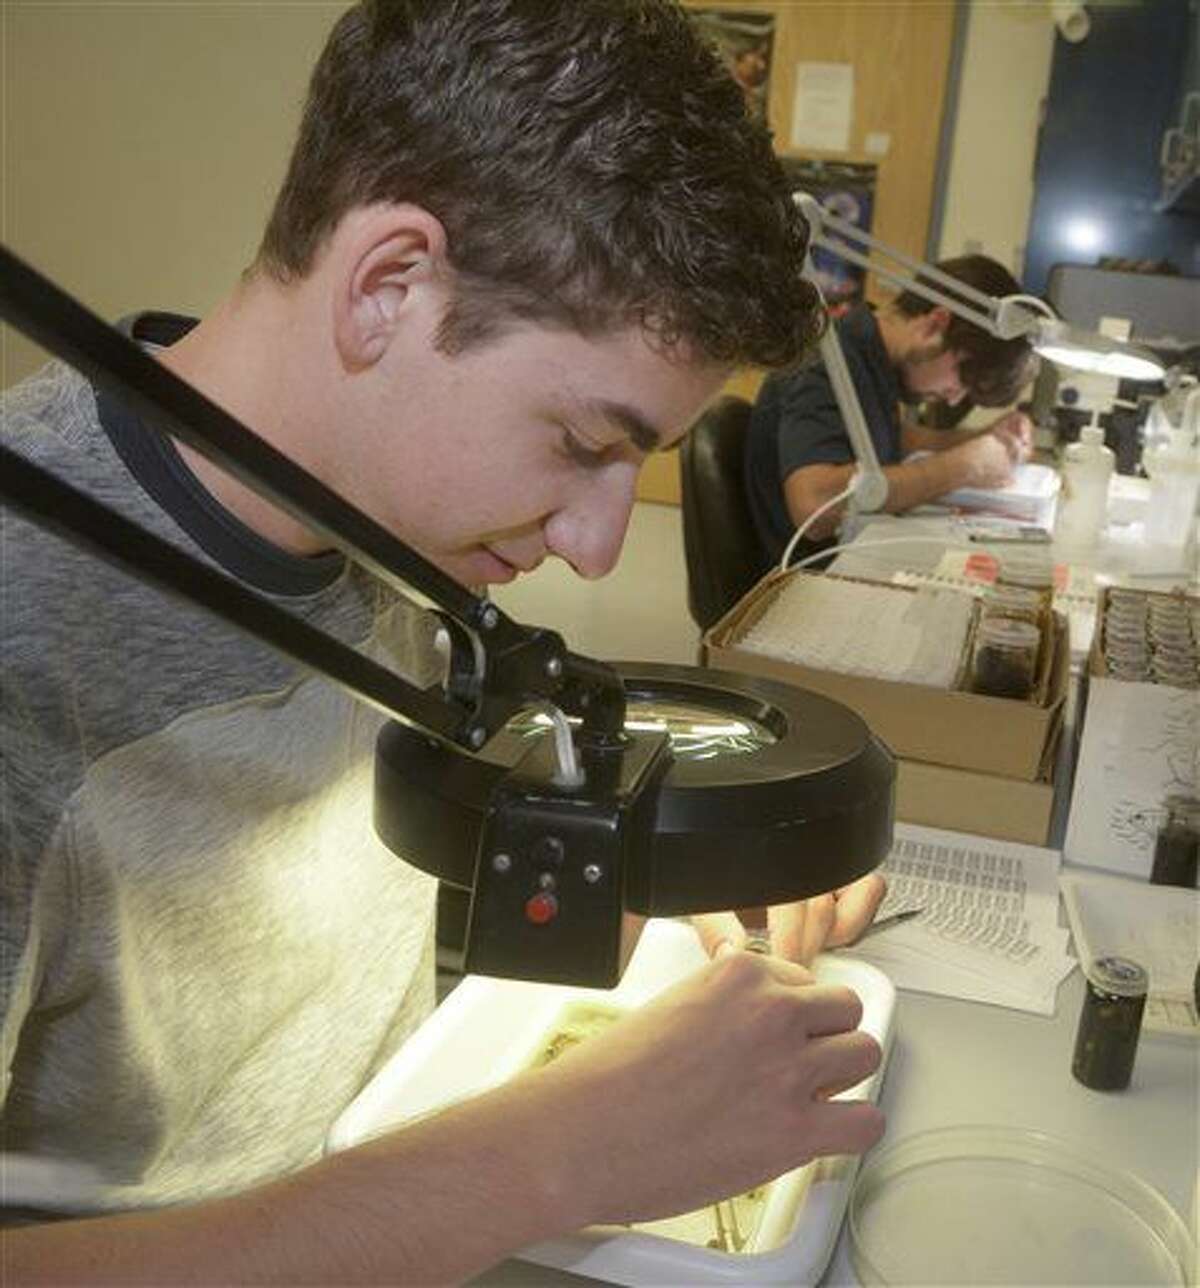 ADVANCE FOR WEEKEND EDITIONS - In this Thursday, October 6, 2016, photo, University of New Mexico student Wesley Noe, of Albuquerque, N.M., left, and Joaquin Garcia, of Santa Fe, N.M., sort through arthropods collected from the Valle Grande and Bandelier National Monument at the Museum of Southwest Biology at the university in Albuquerque. (Greg Sorber/The Albuquerque Journal via AP)